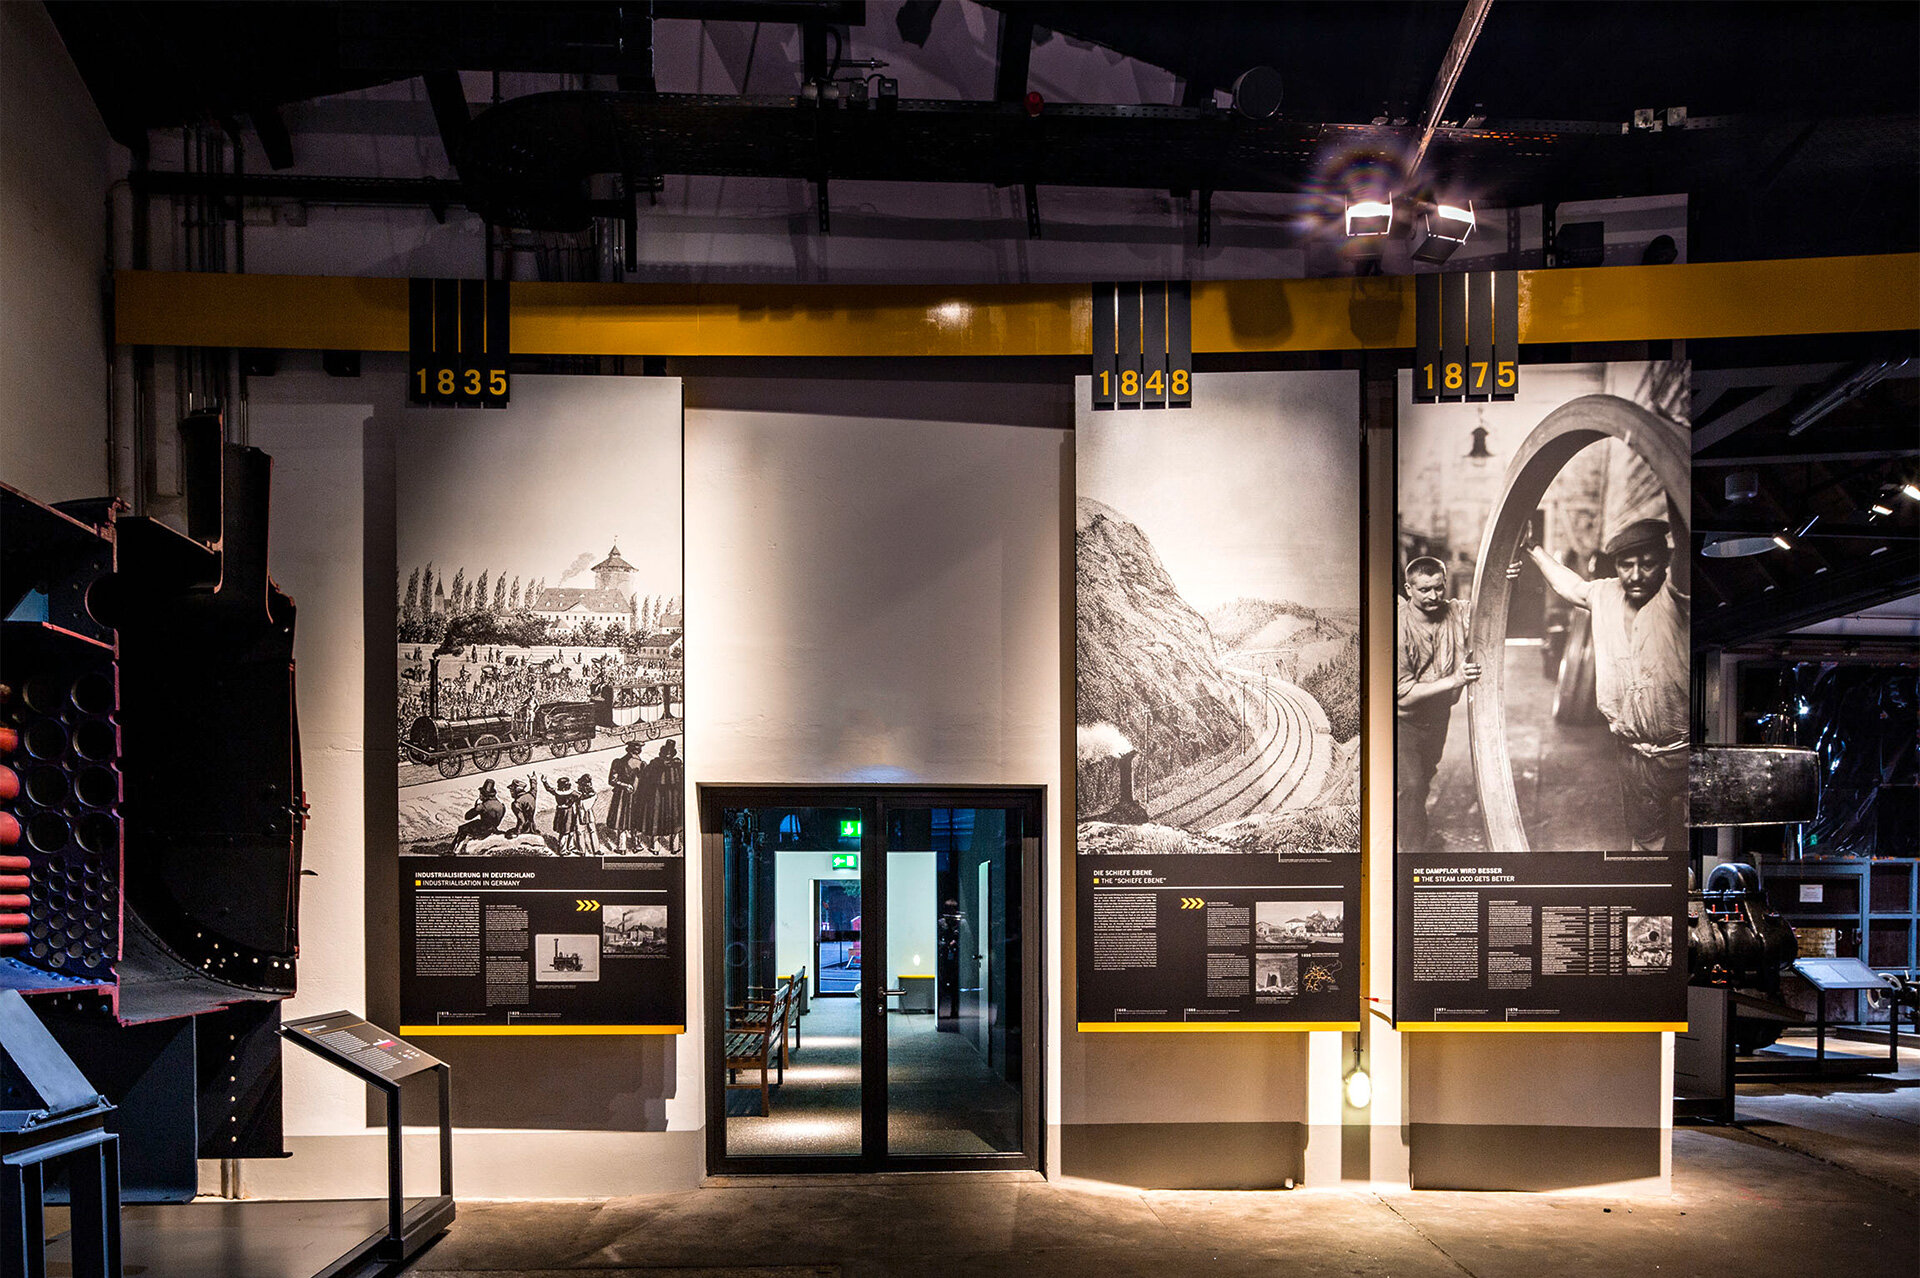 A large historical timeline inside the museum